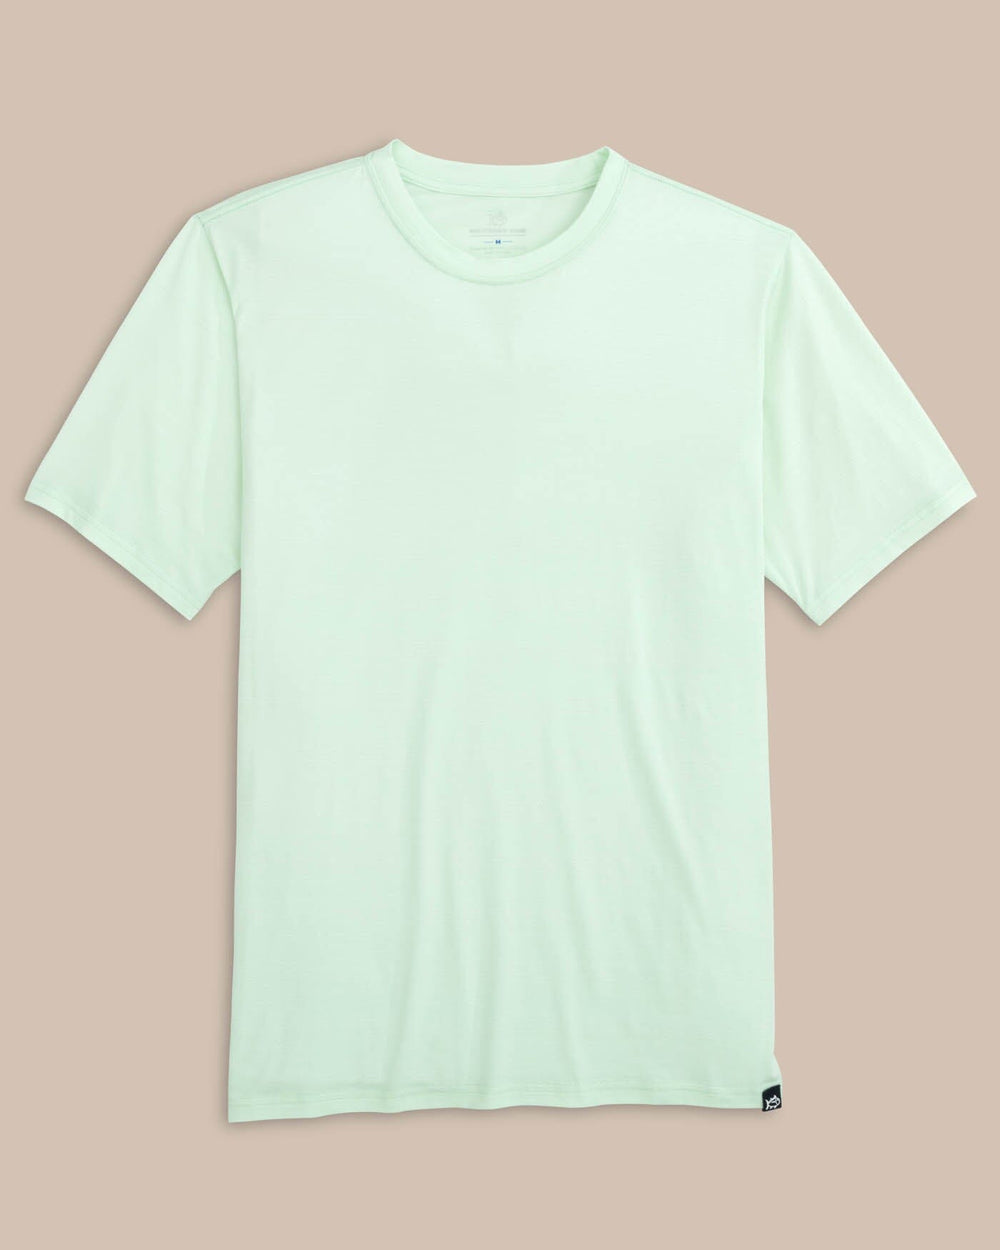 The front view of the Southern Tide The Seaport Davenport Stripe Tee by Southern Tide - Morning Mist Sage